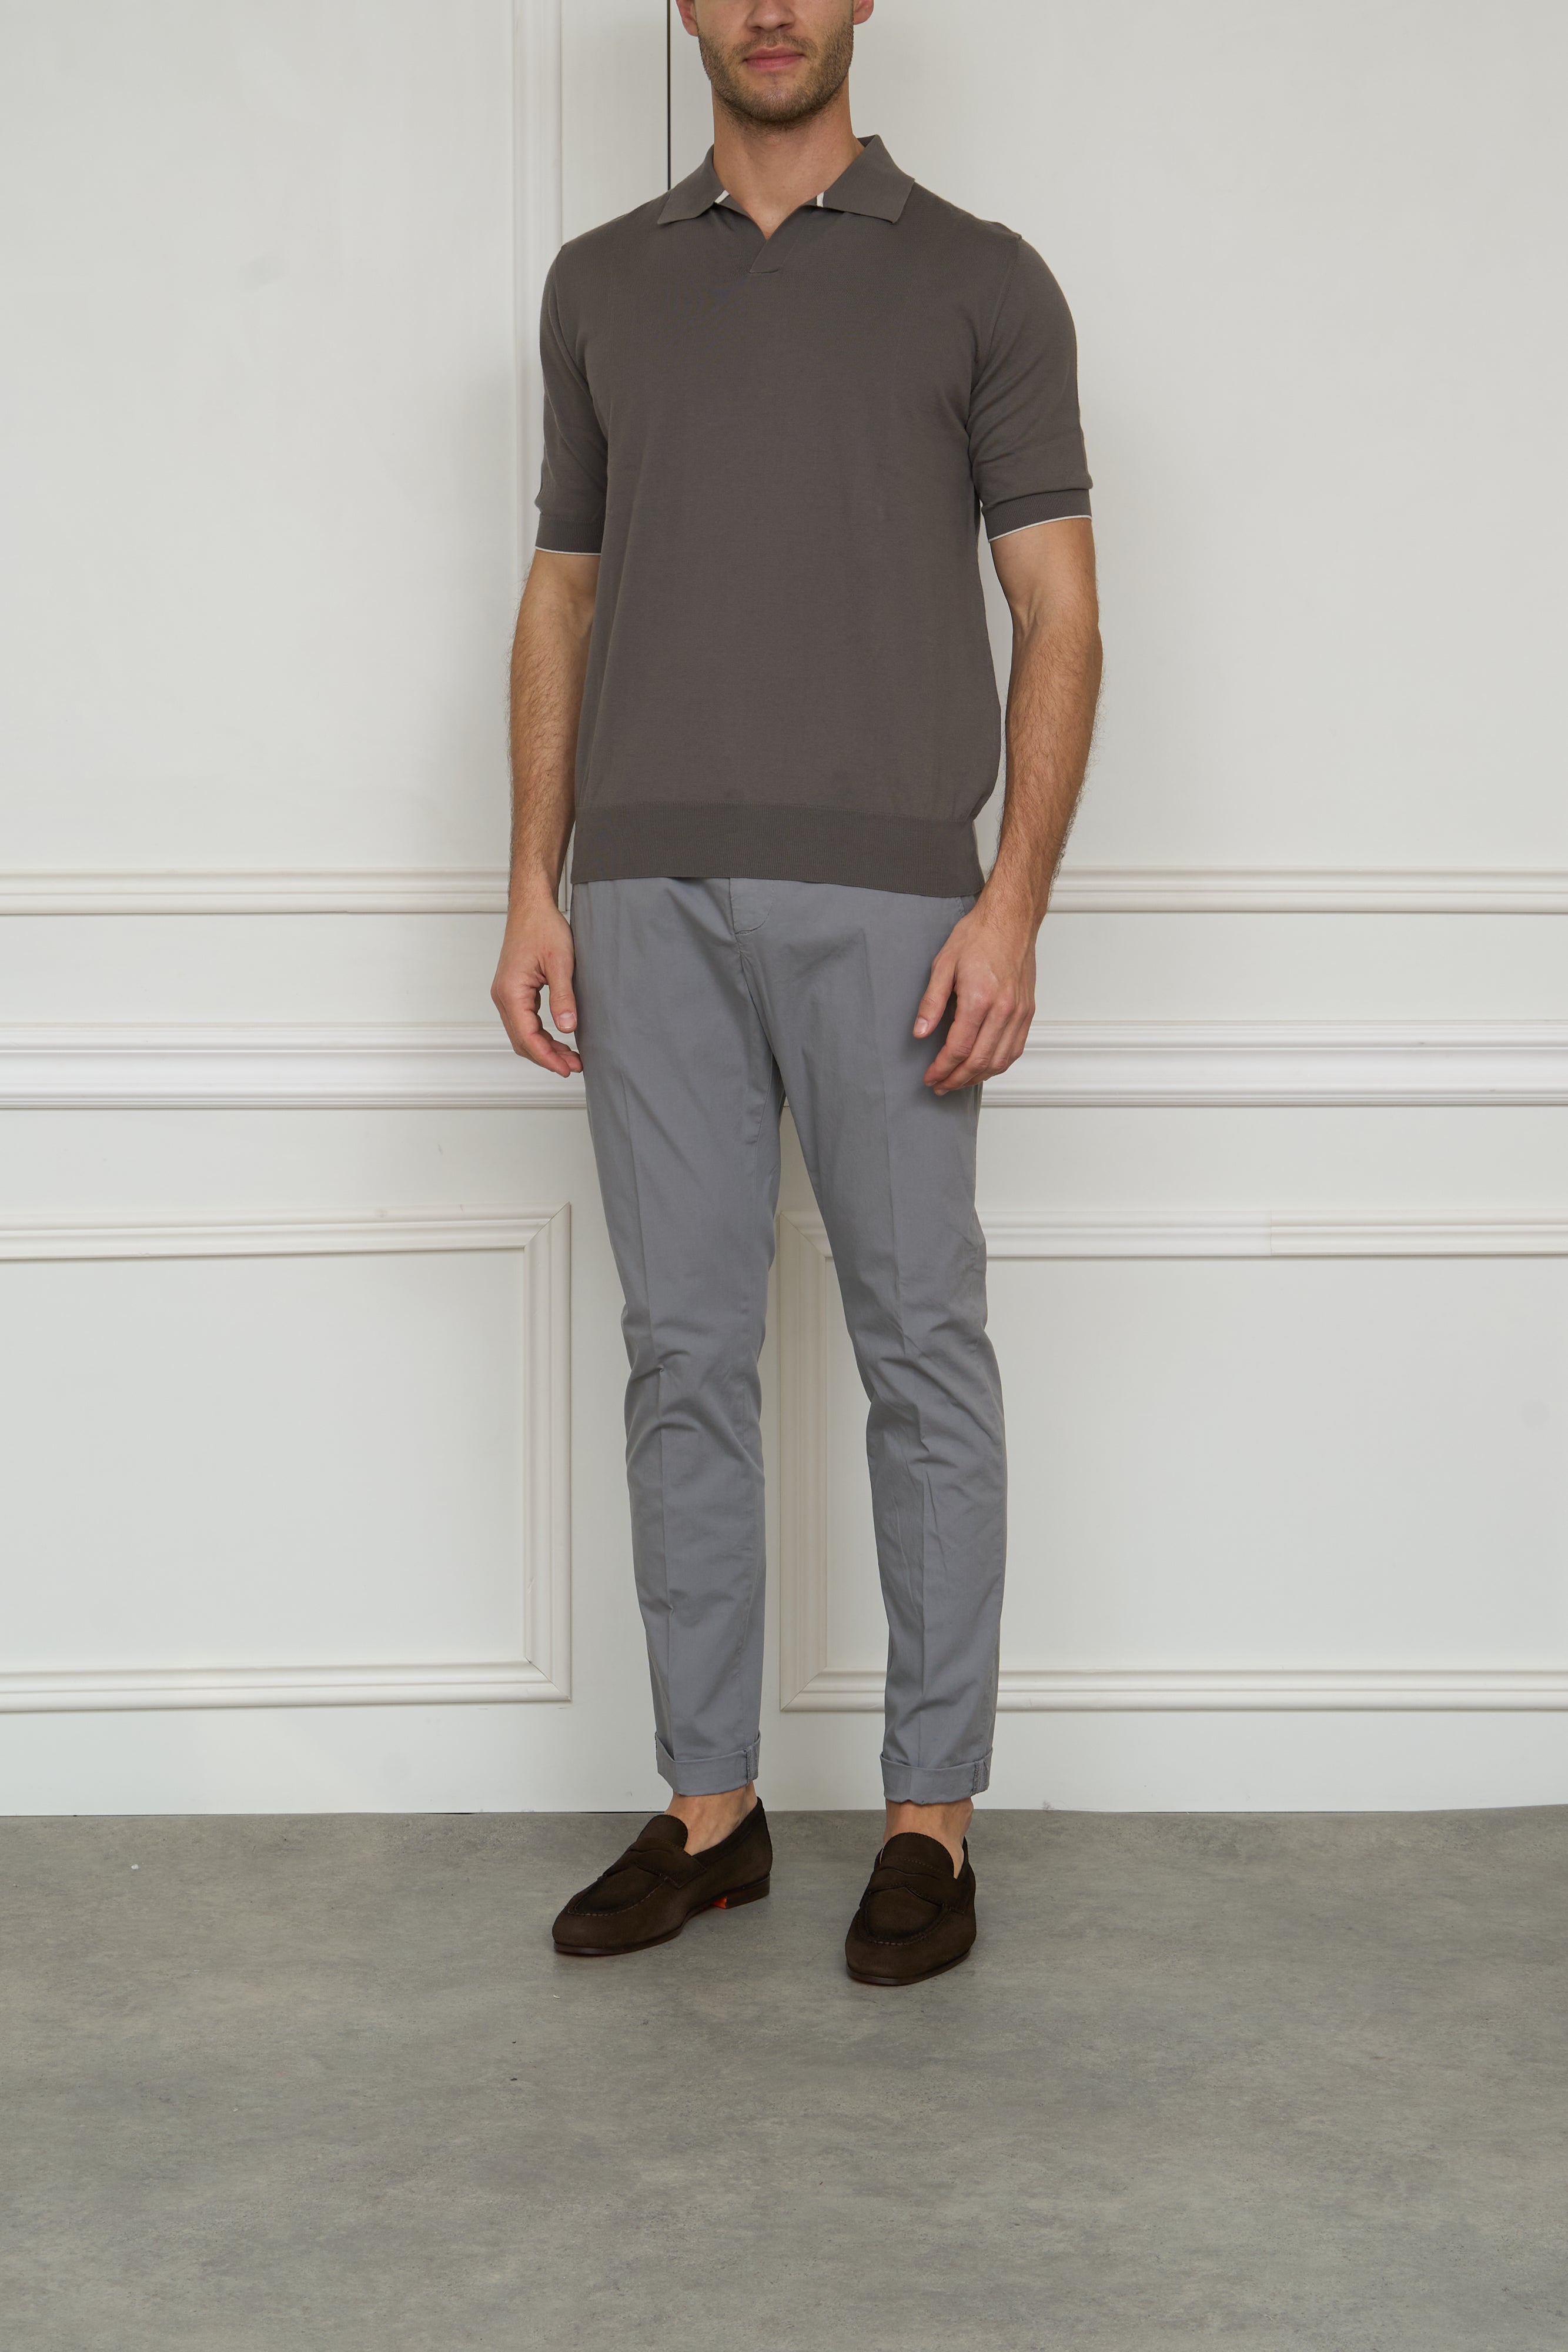 Poloshirt in taupe